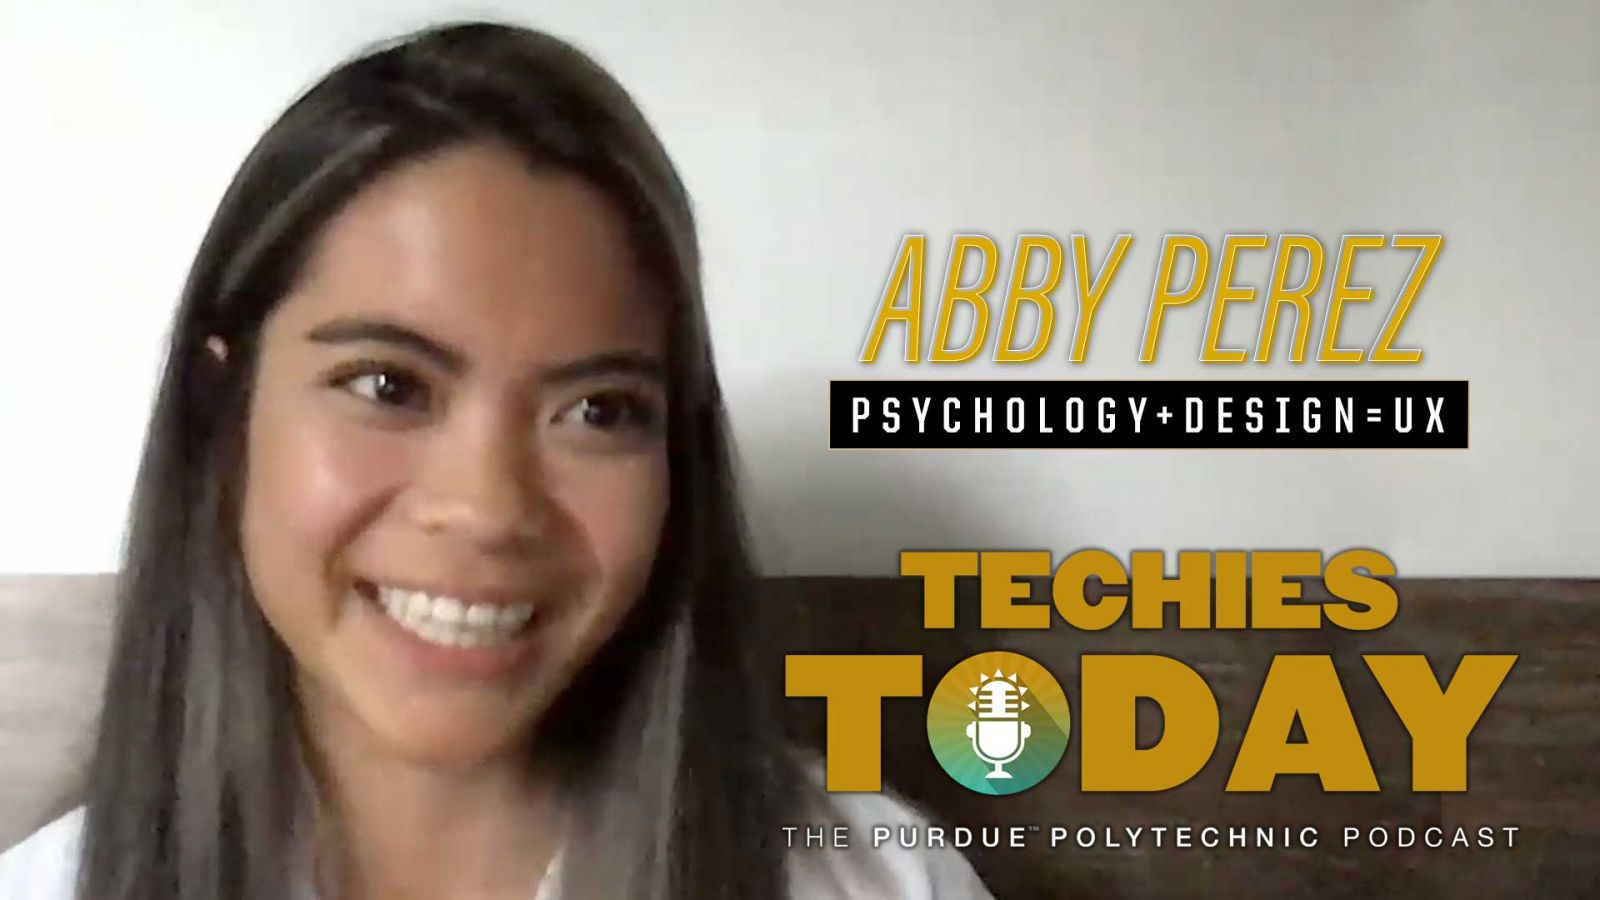 Abby Perez, Psychology+Design=UX, on Techies Today, the Purdue Polytechnic Podcast